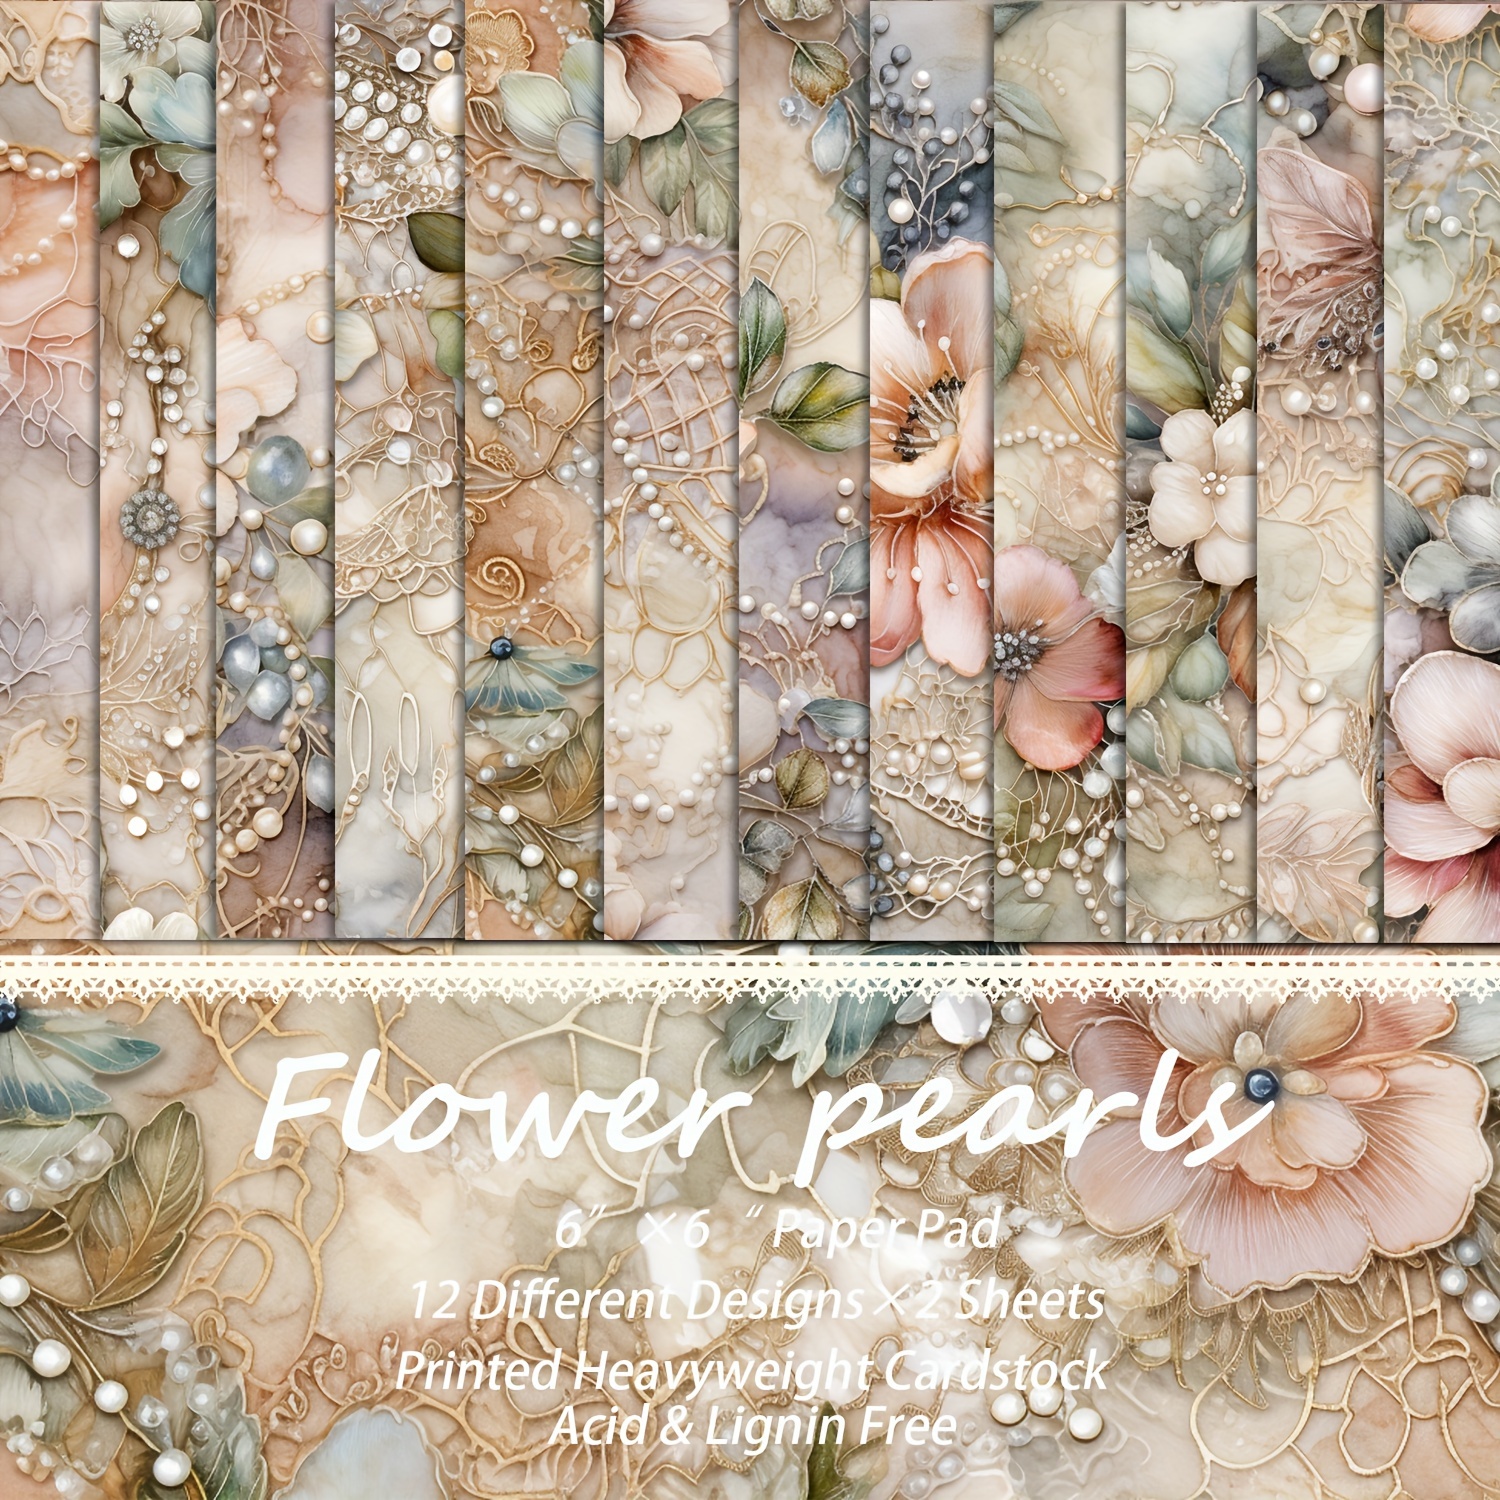 

24sheets(12 Patterns) Vintage Flowers Scrapbook Paper Pads, Perfect For Mini Gift Packaging,bullet Journals, Arts Crafts,scrapbooking Supplies,background Pad,junk Journal Kits,diy Crafts